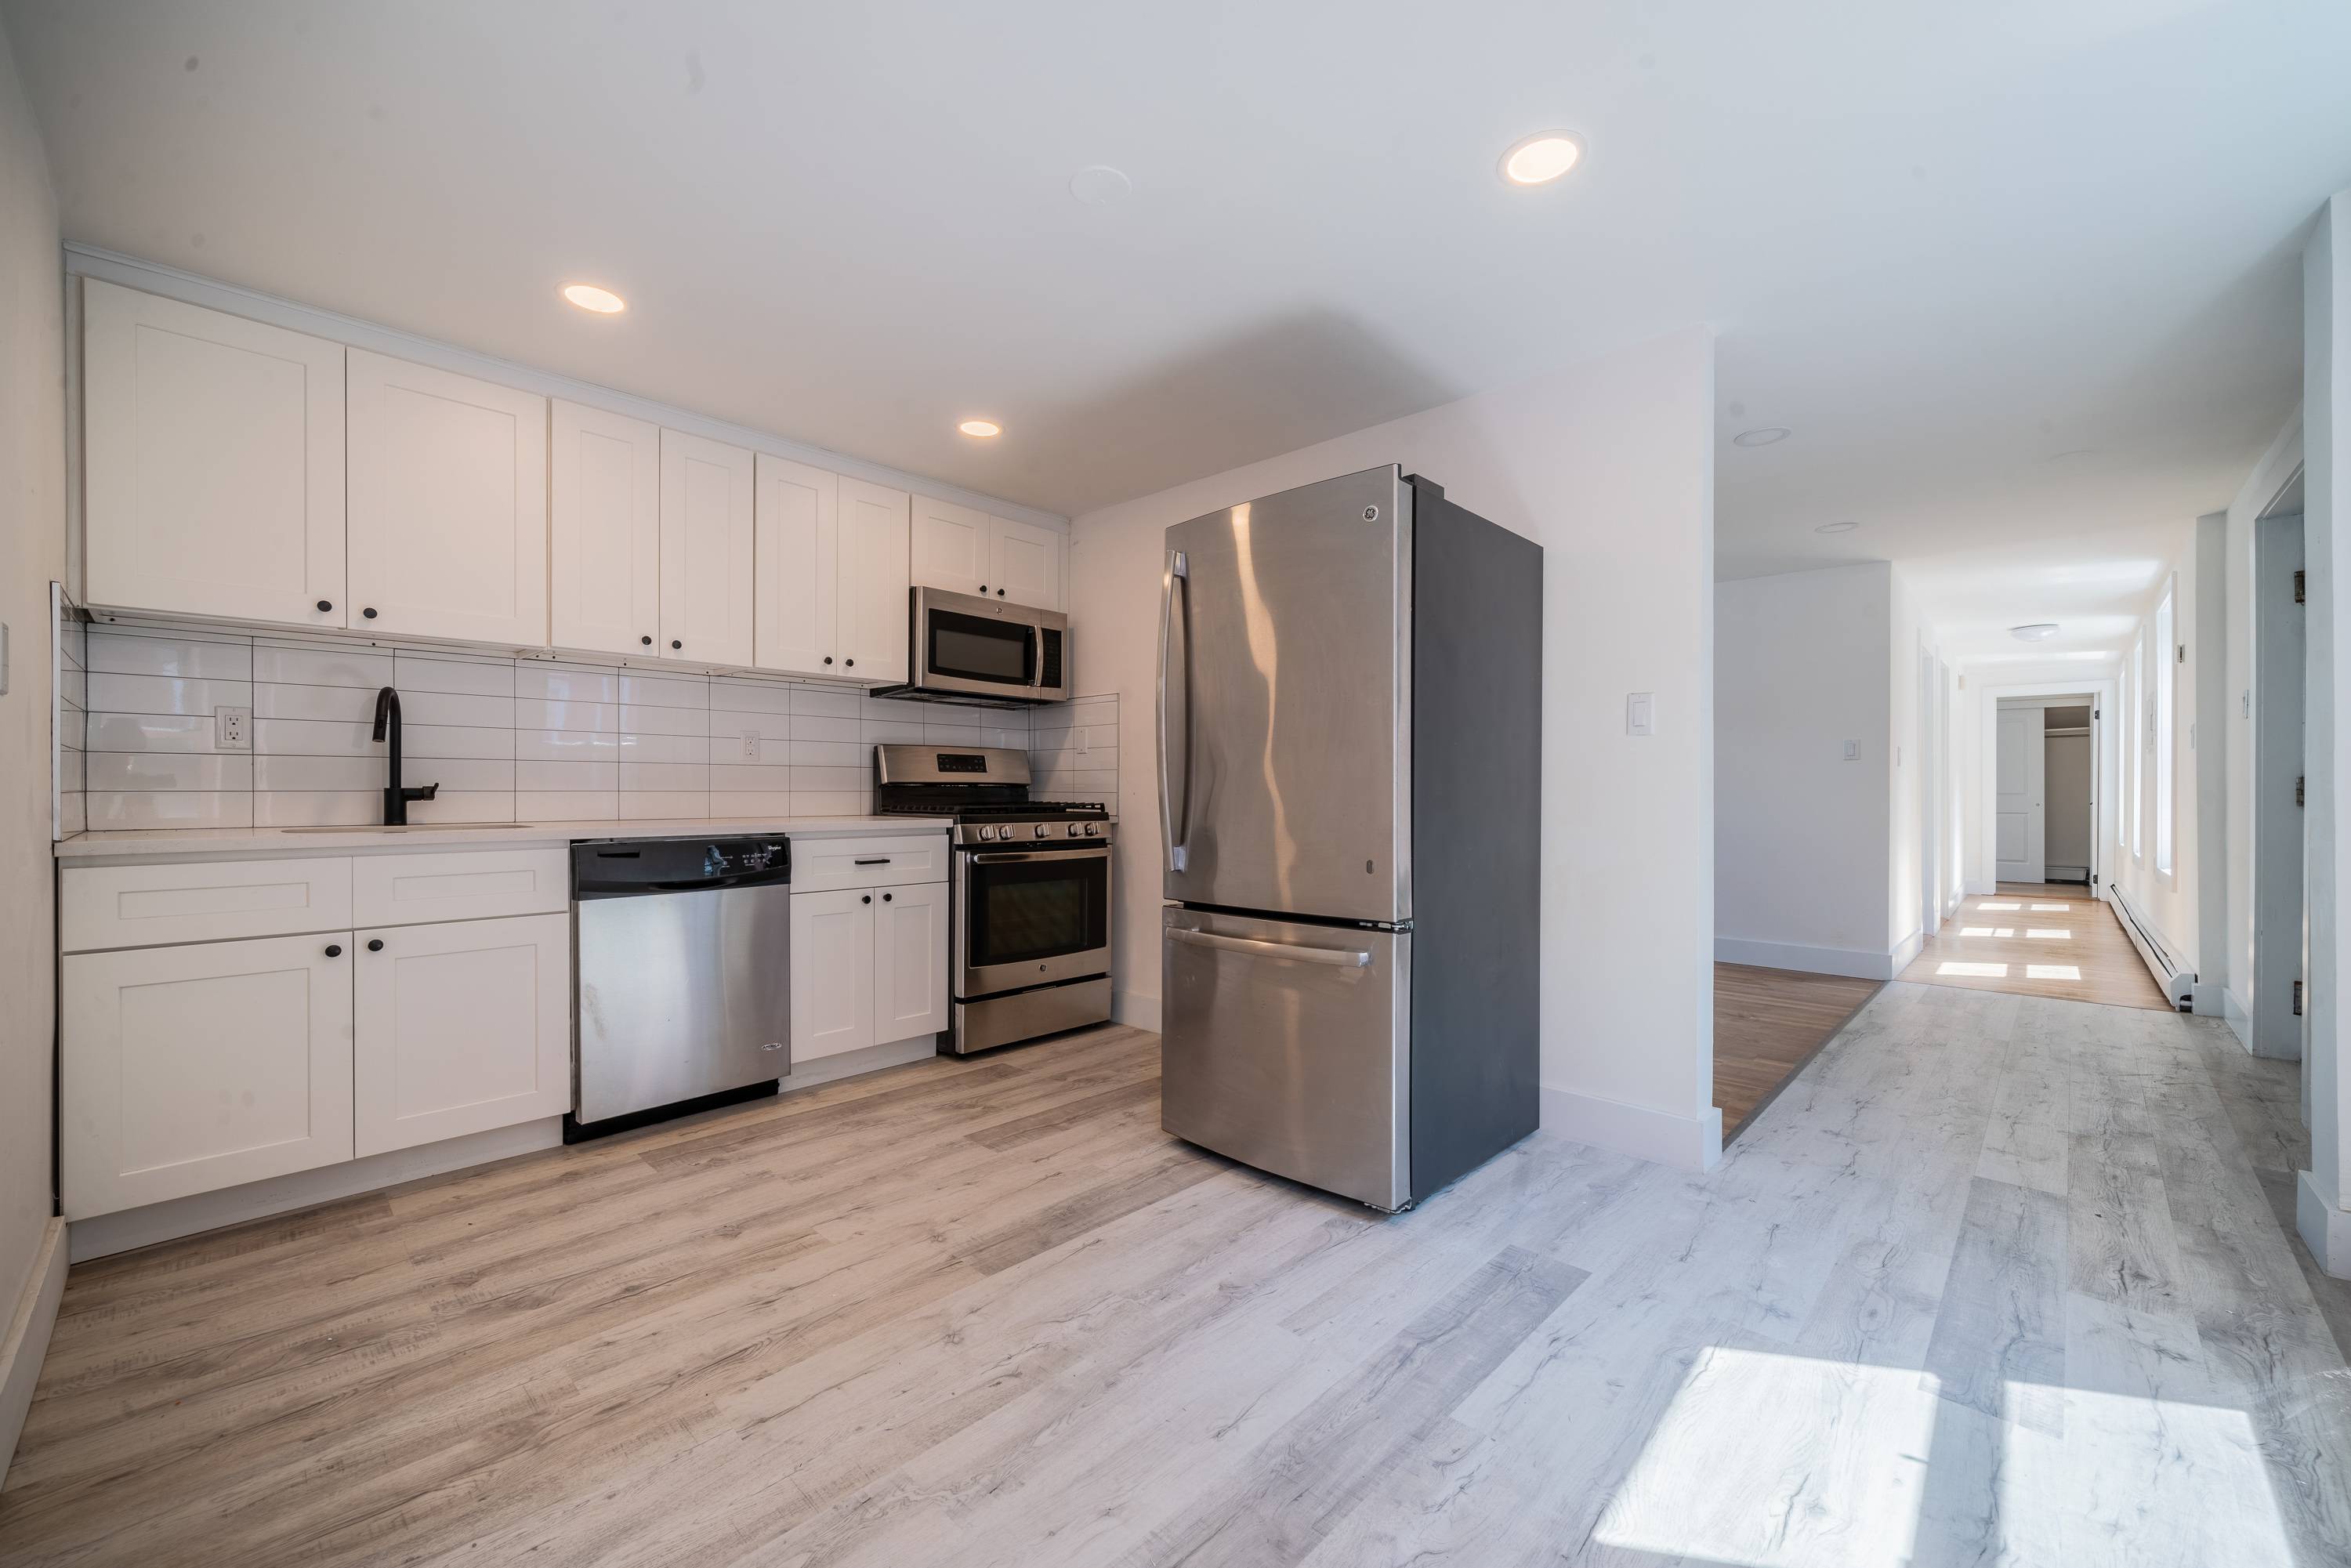 Stunning and Brand New and Renovated 3 Bedroom 1 Bath Apartment in Hoboken, NJ.  Brand New Stainless Steel Appliances